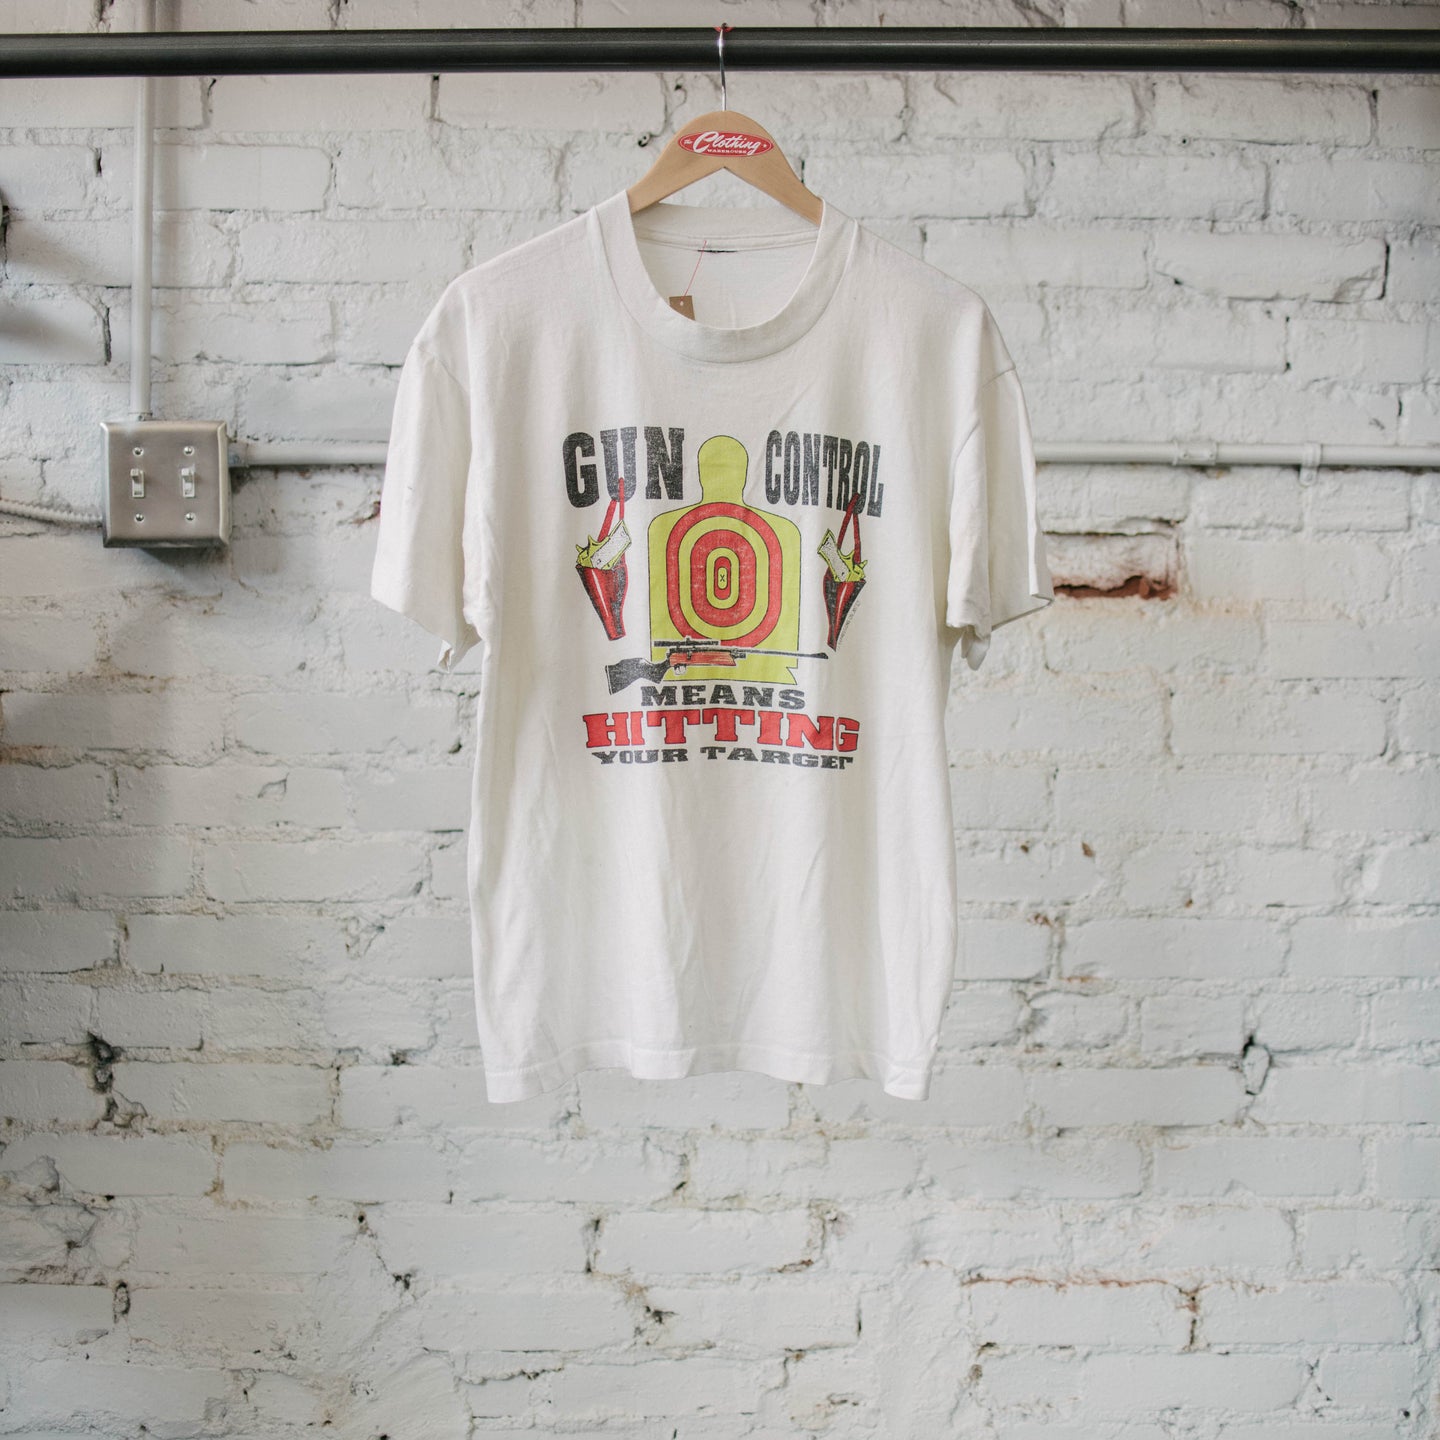 Vintage Expressions Unlimited Gun Control Tee